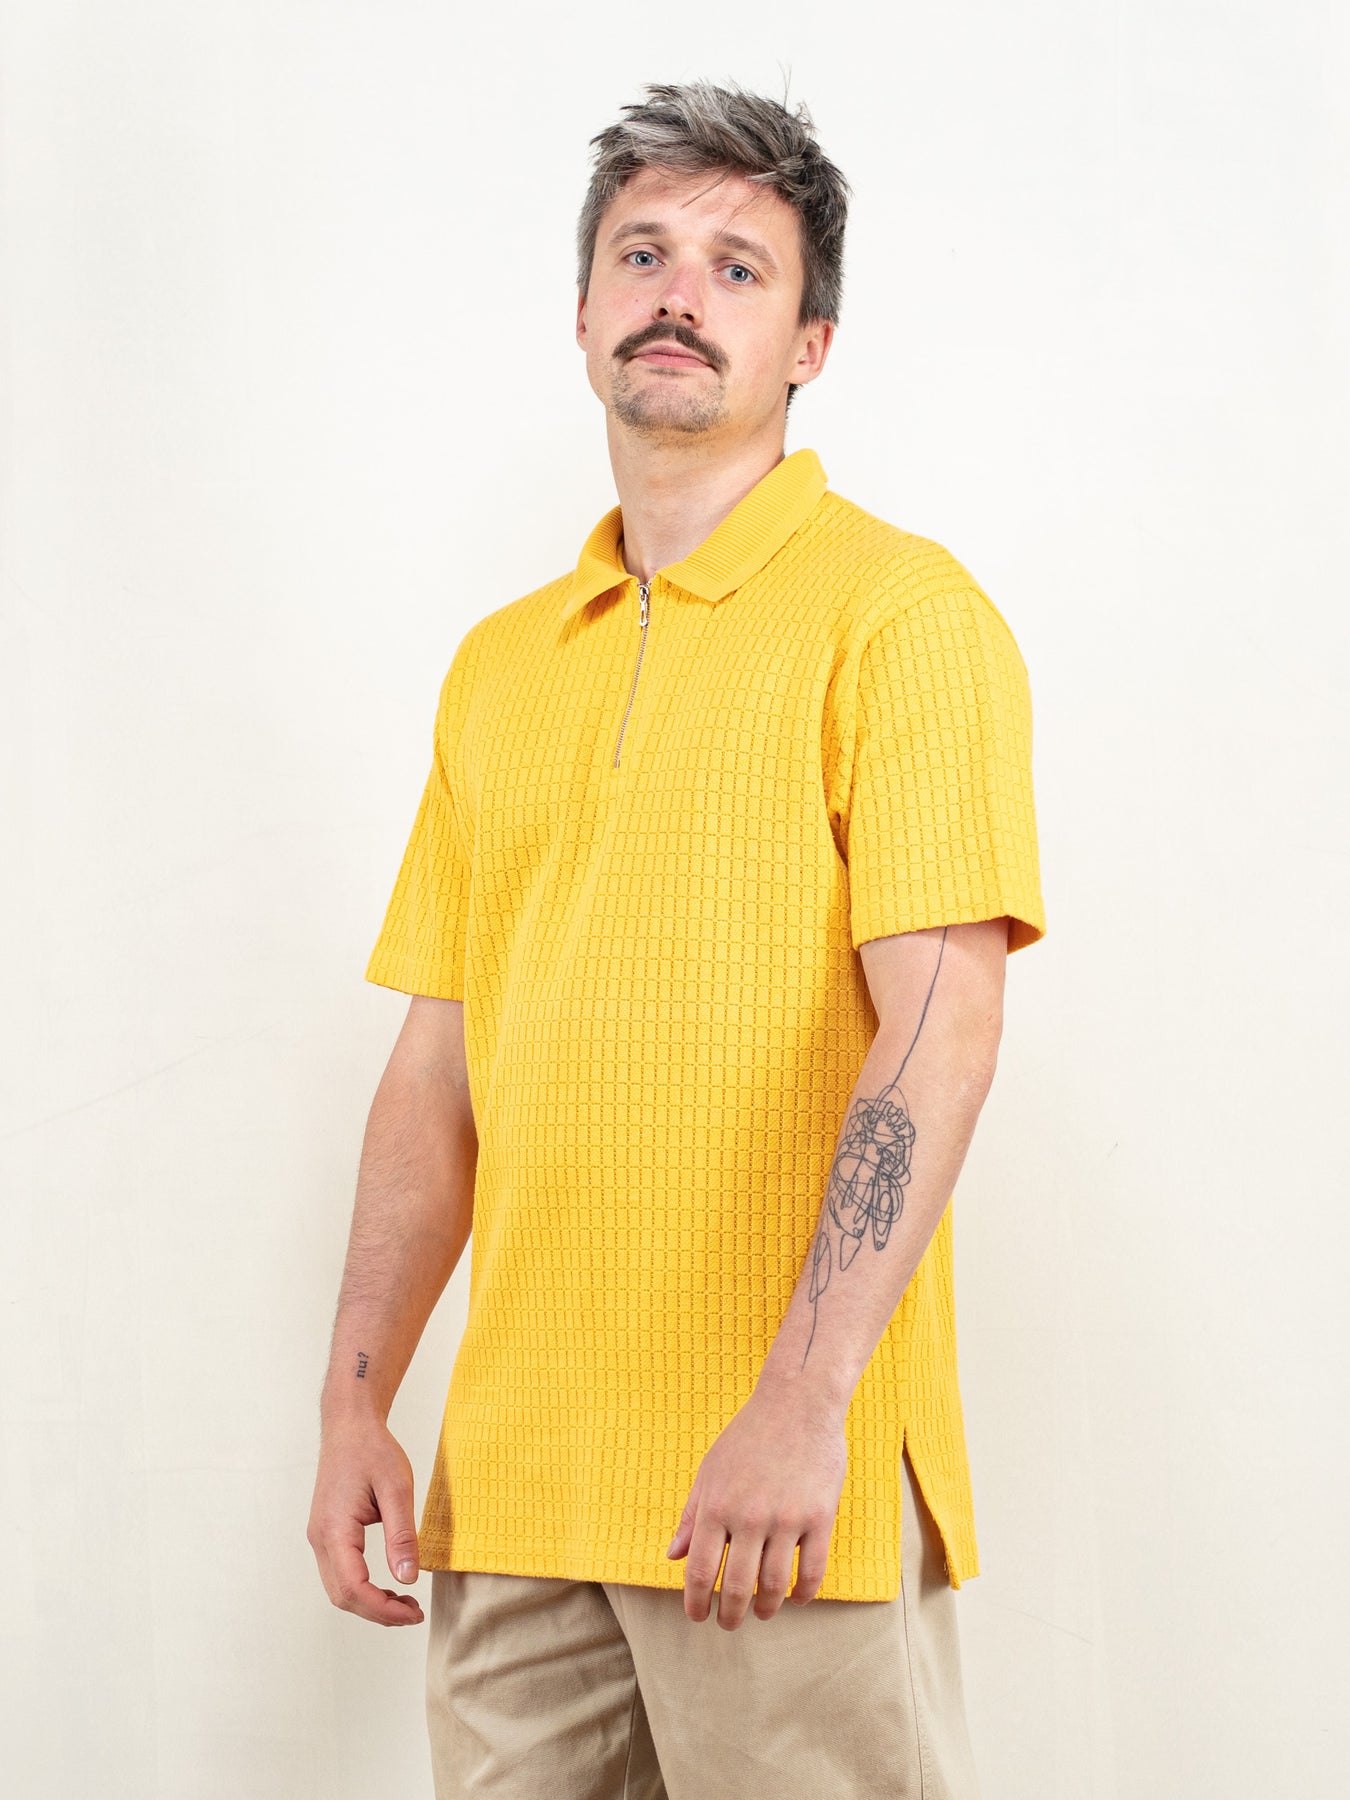 Online Vintage Store | 80's Men Polo Shirt | Northern Grip